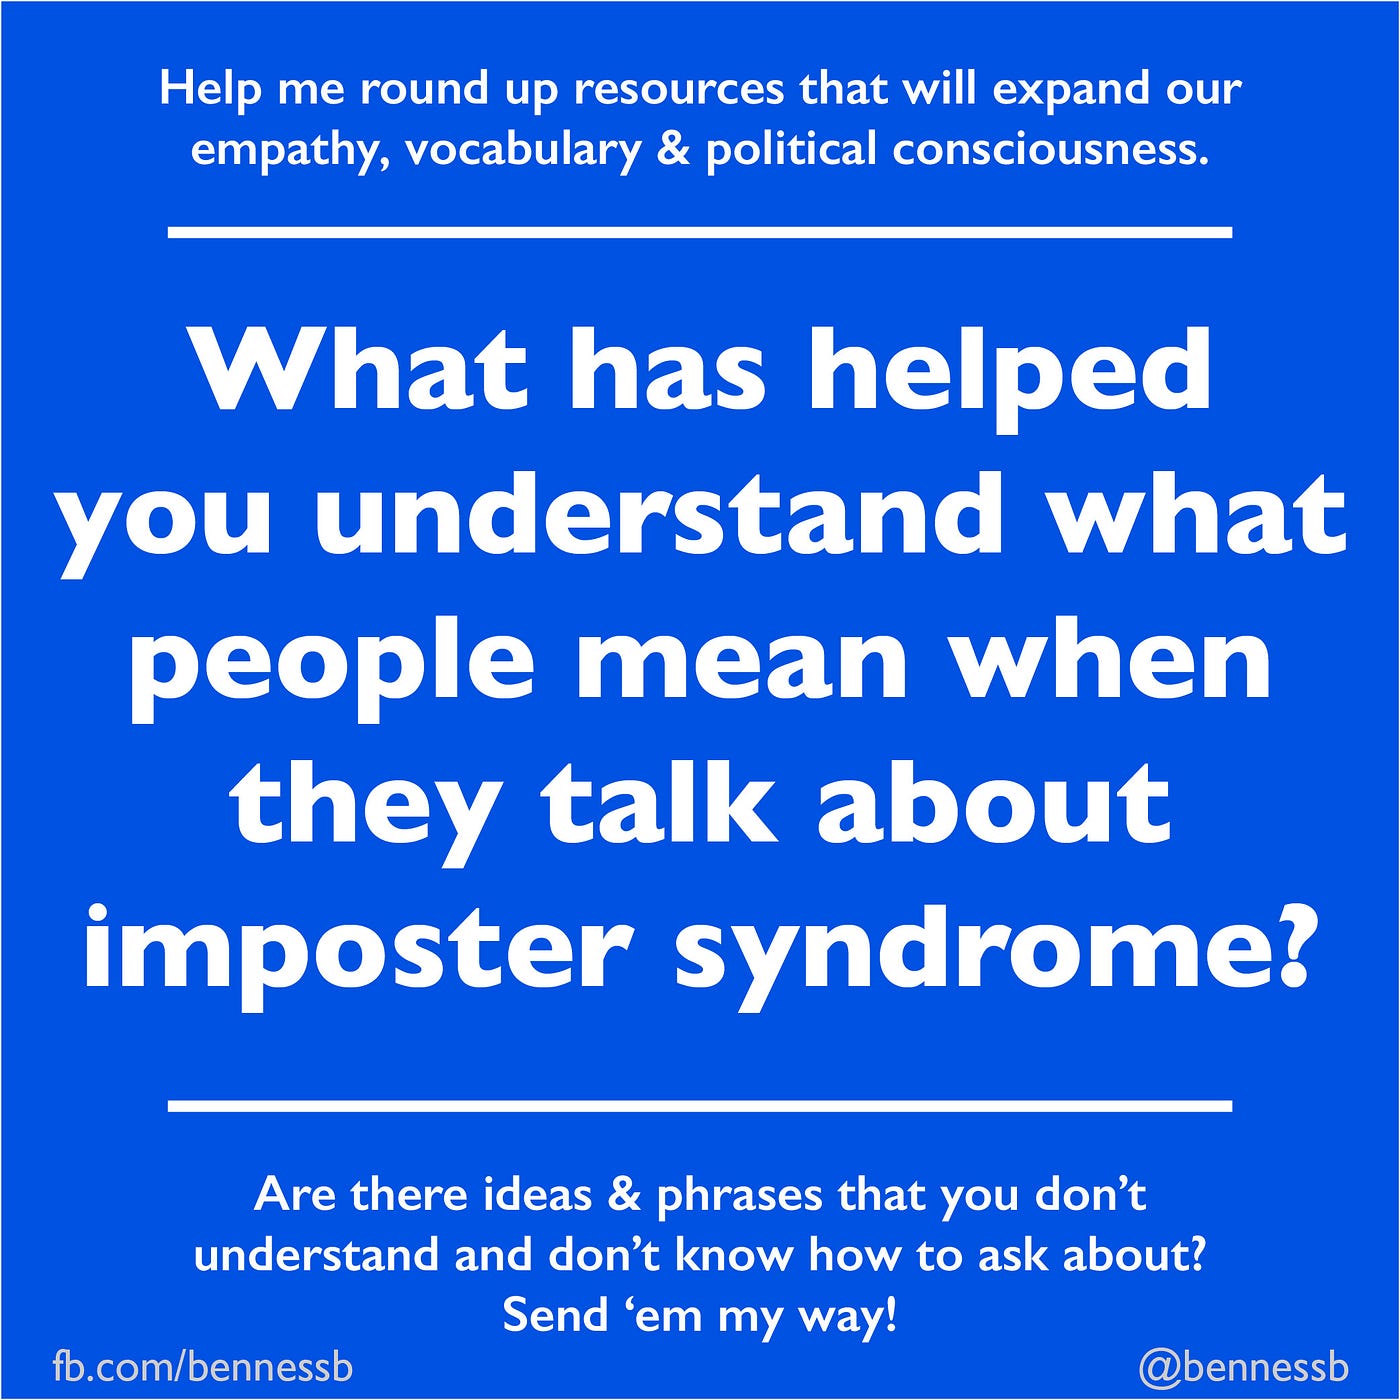 Imposter syndrome: what people mean, by Brianne Benness